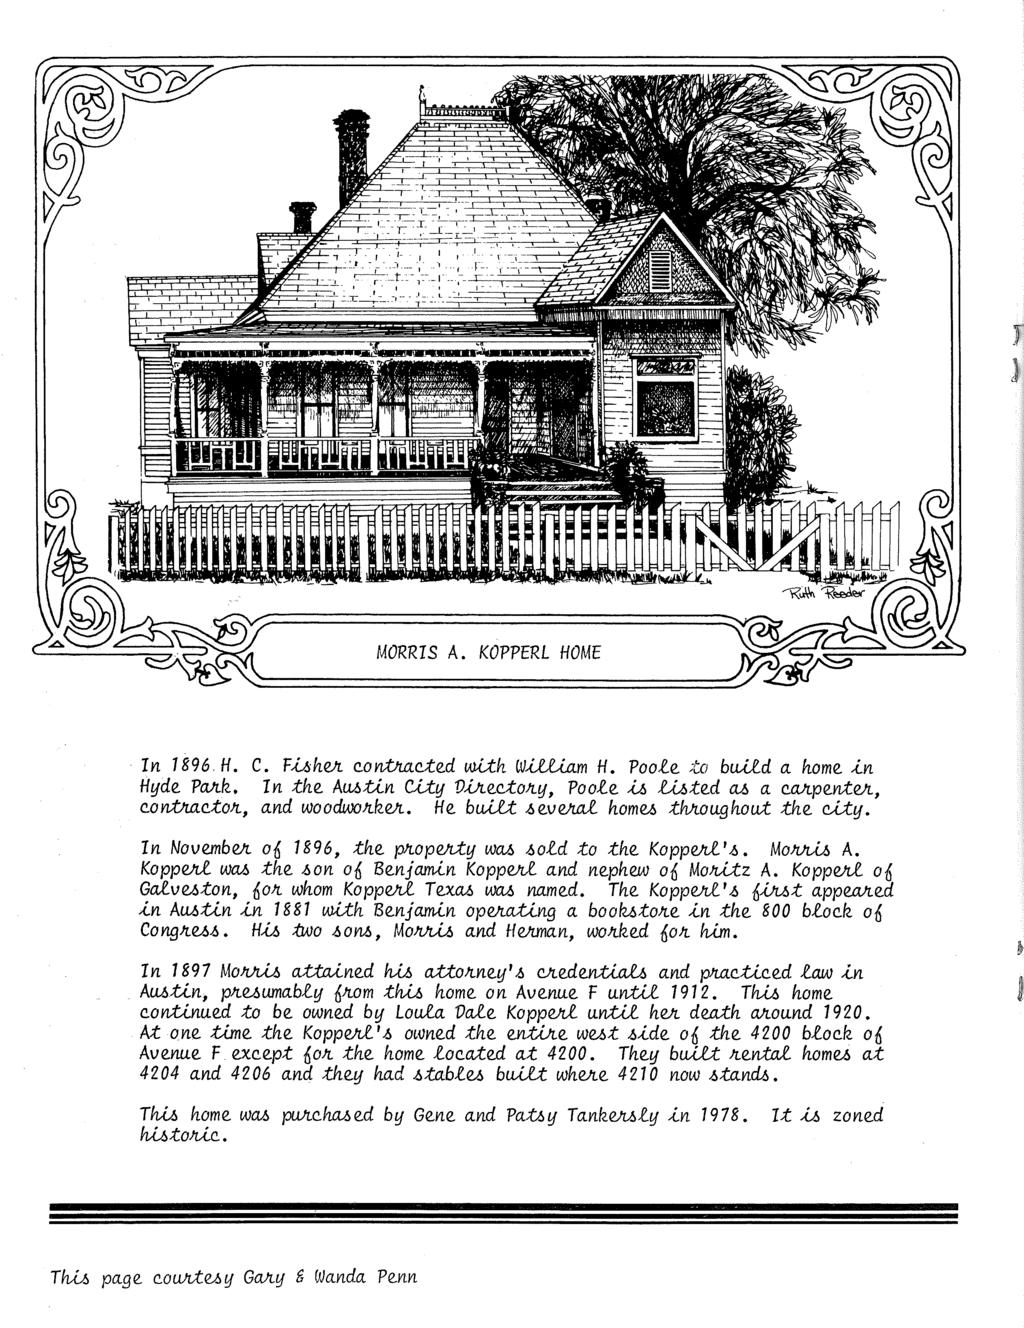 MORRIS A. KOPPERL HOME In 1896 H. C. F~h~ eontnaet~d with W~m H. Pool~ to build a hom~ ~n Hyd~ PaJz.k.. In th~ AM:ti..n Wy Vht~etoJty, Pool~ -<...6 wt~d a...6 a eajz.p~nt~, eontnaetojt, and woodwojtk.